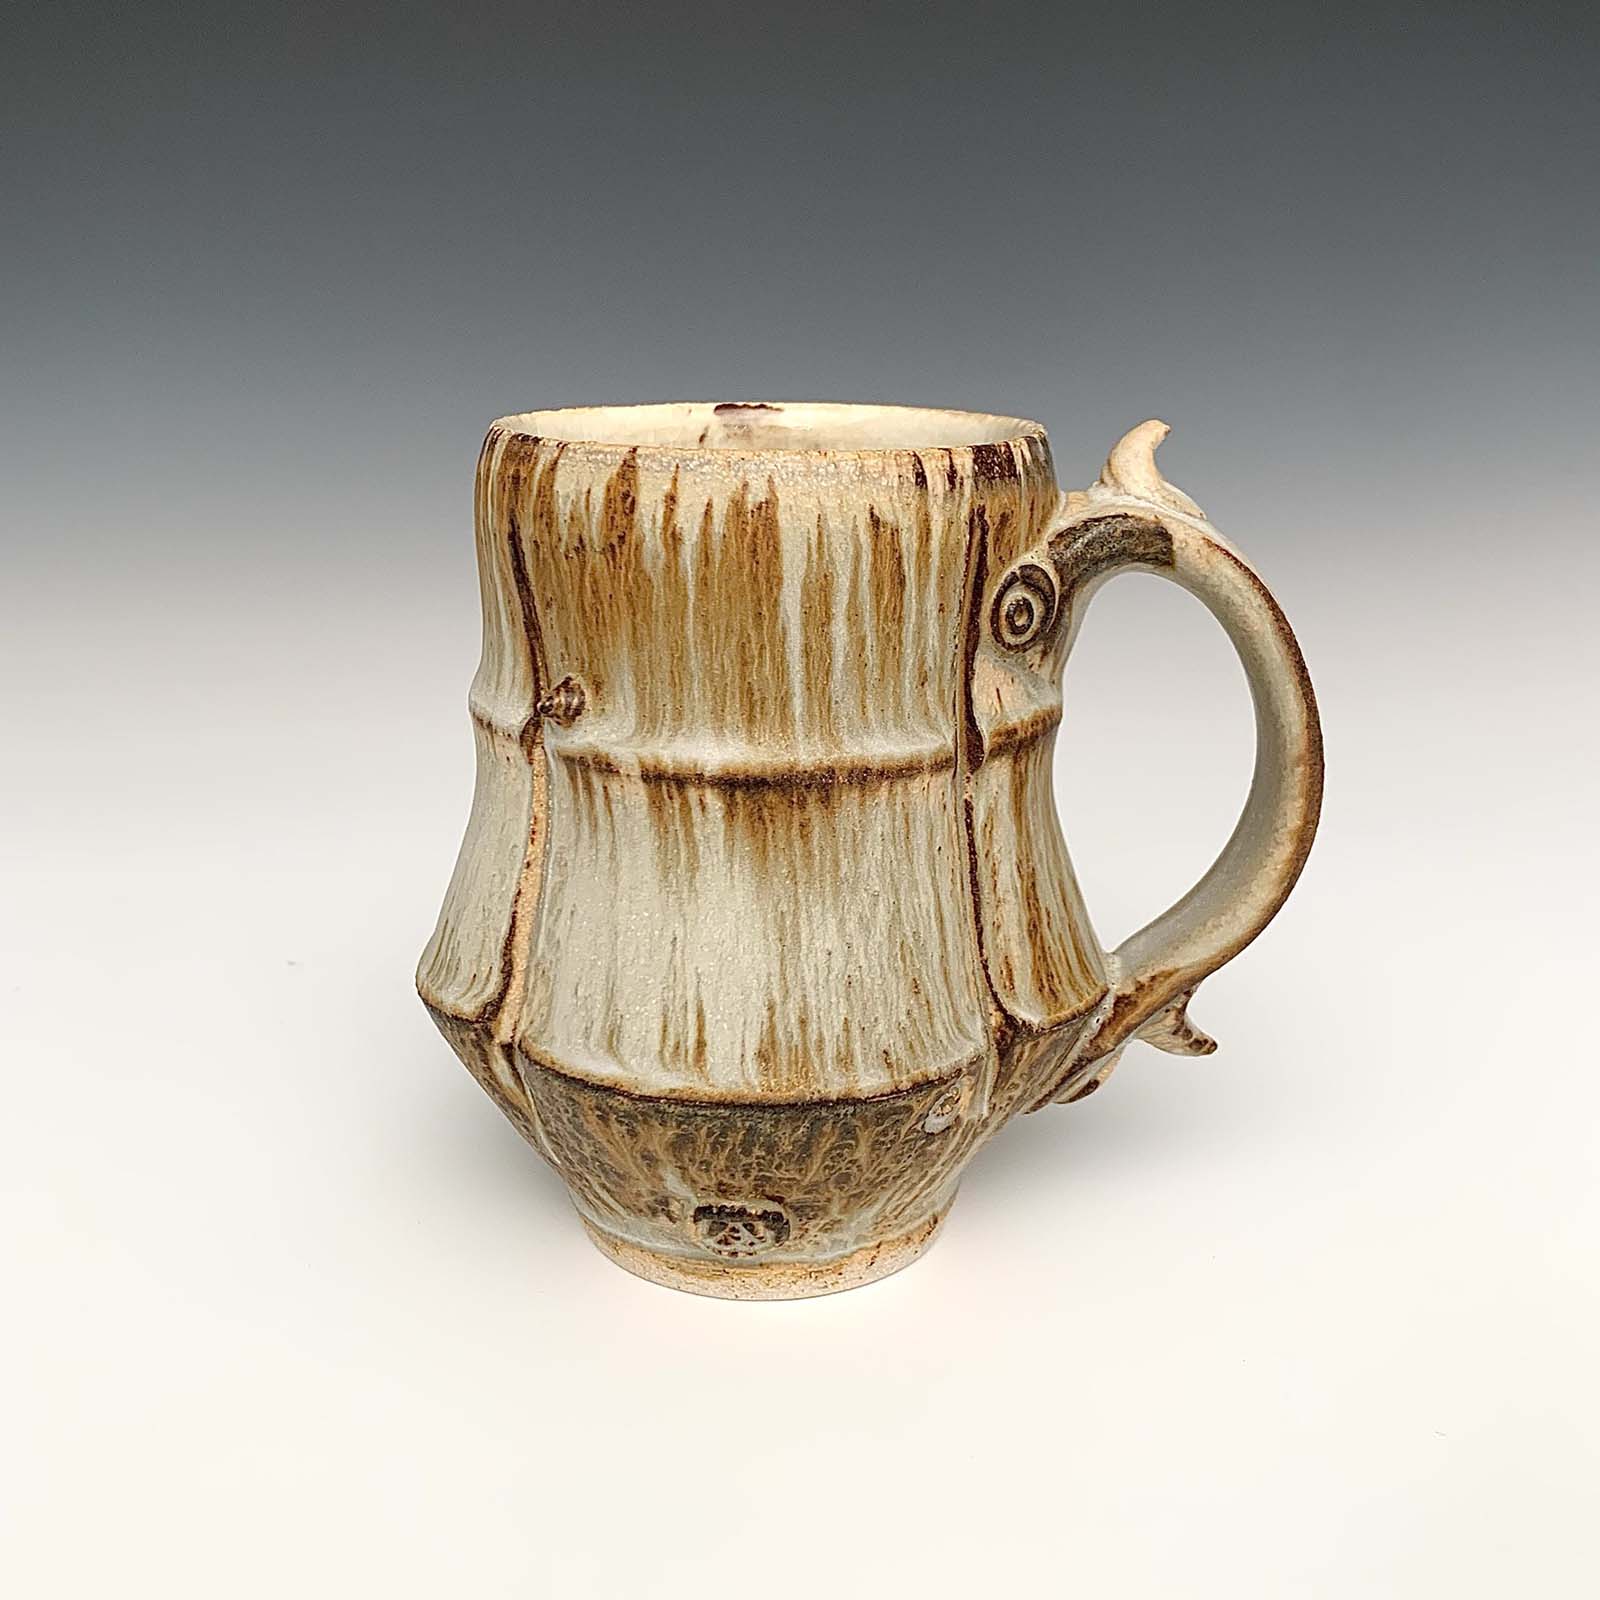 Andres Montenegro, Oatmeal Armored mug, 4.5 in. (11 cm) in height, stoneware, fired to cone 10 in reduction, 2021. 